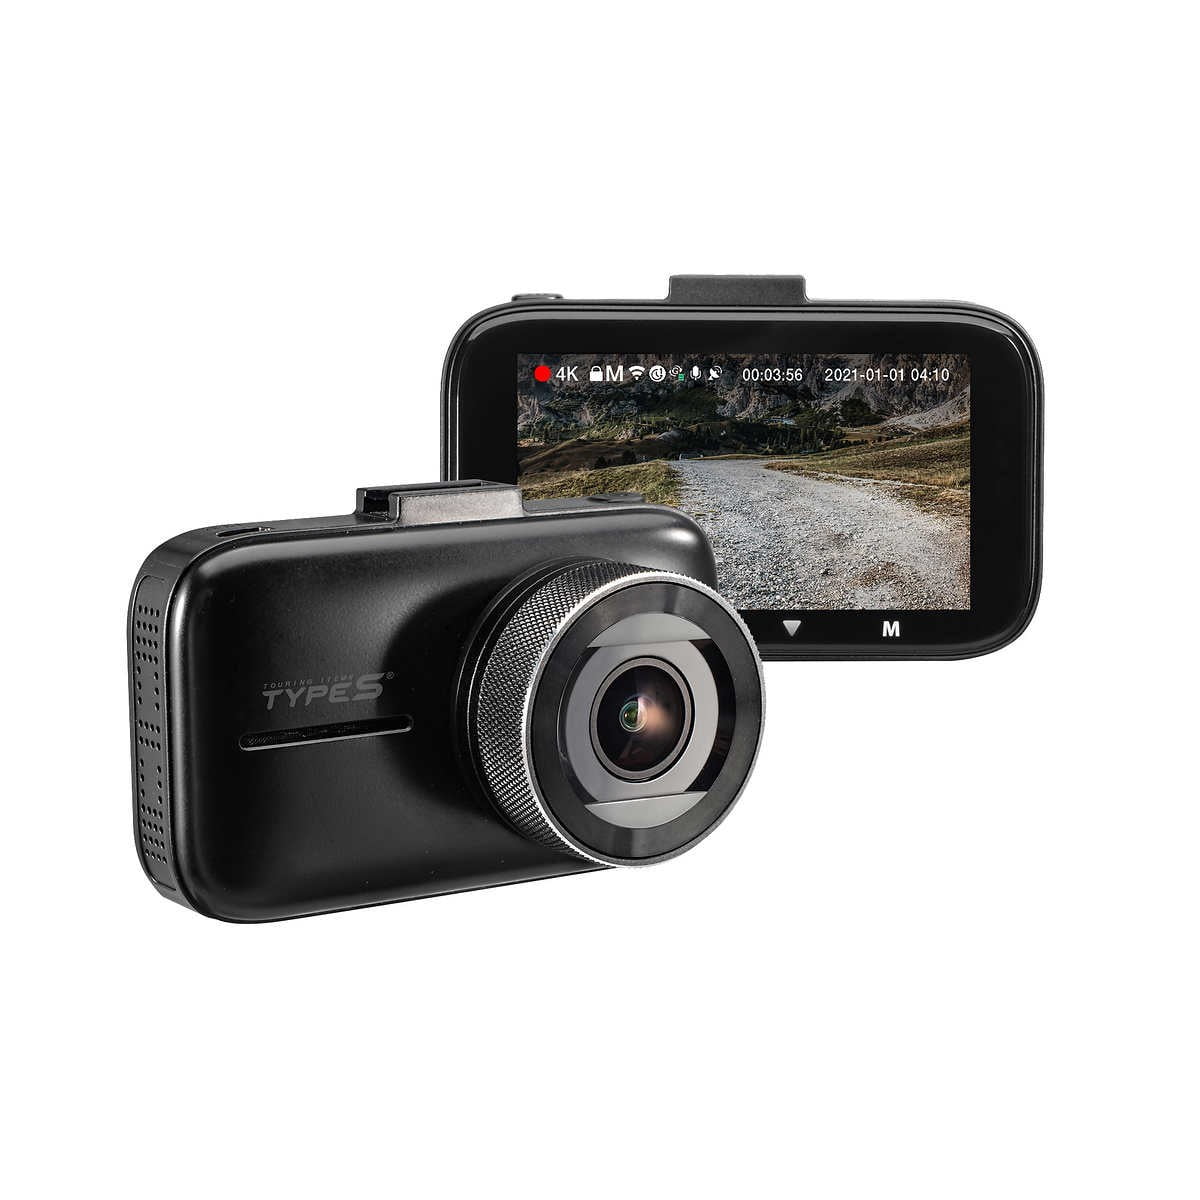  Type S P100 Plus Smart 360 Recording Dash cam with Live  Streaming via app, 1080p FHD 360° in Cabin Surveillance, Unique VR Video  Mode, Smart G-Sensor Security, GPS Built-in, 16GB Memory